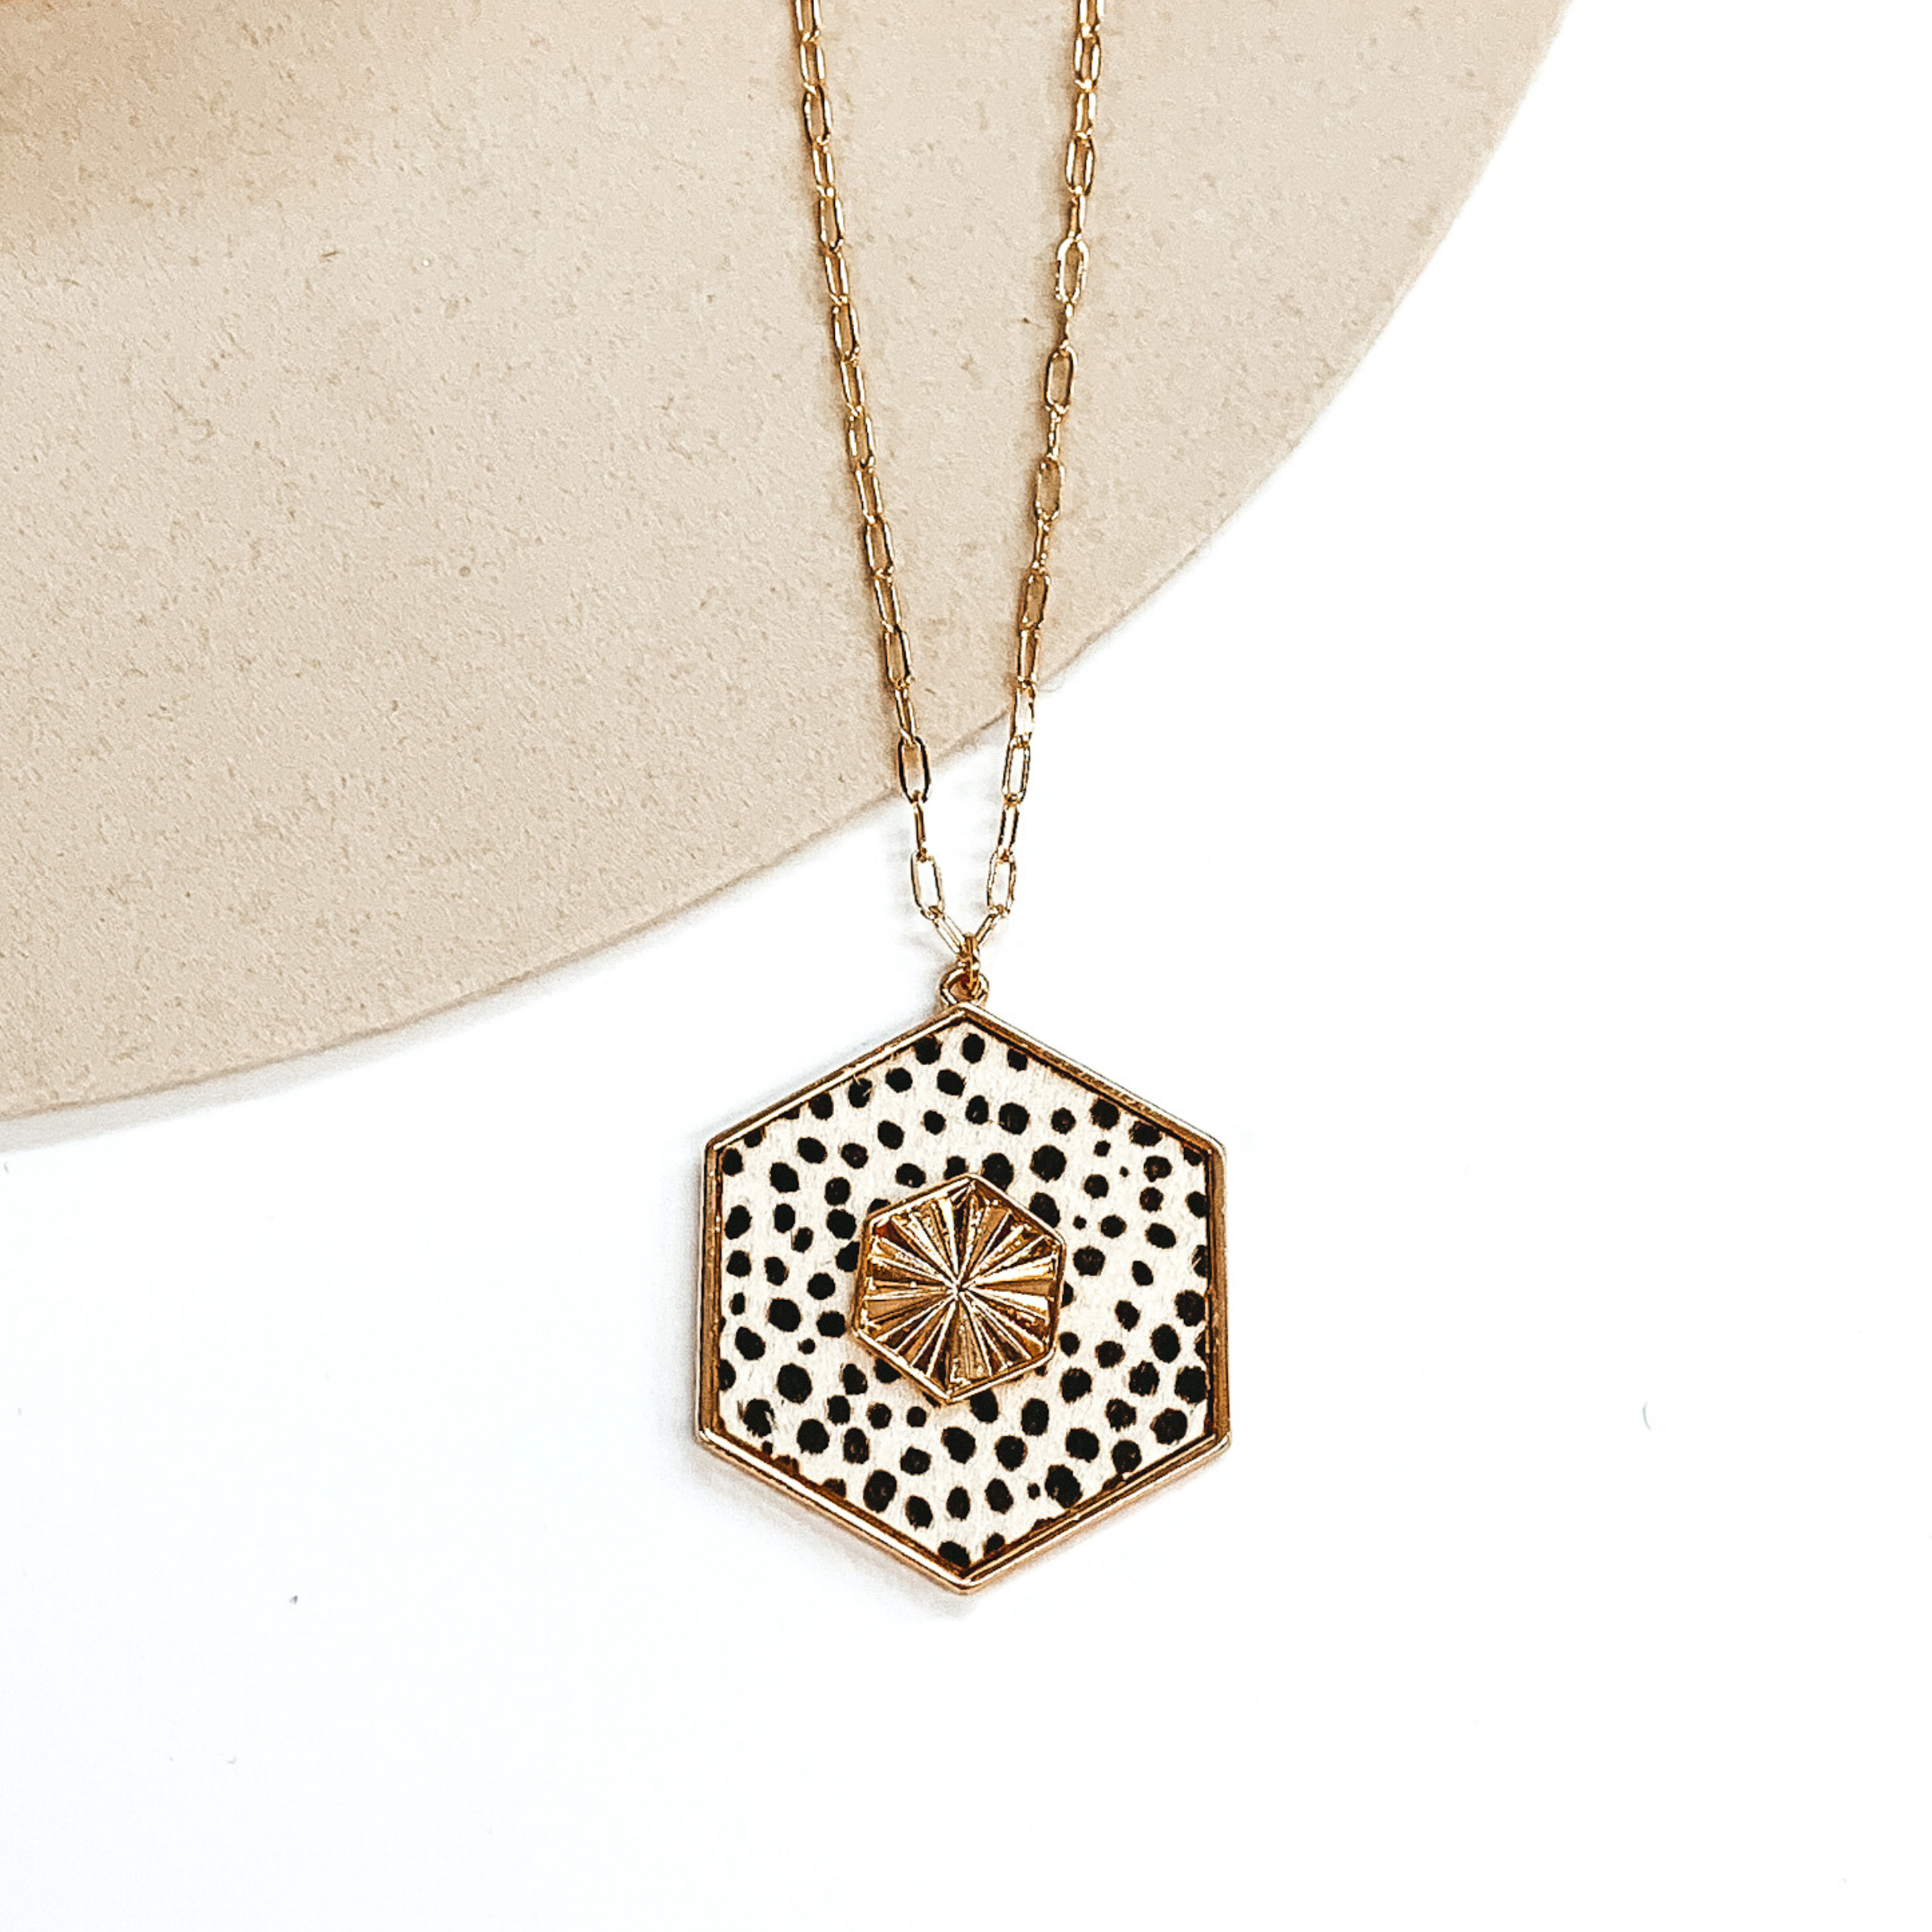 Thin, gold chained necklace with an ivory hexagon pendant with a black cheetah print. The pendant is outlined in gold and has a gold, textured hexagon charm in the center. This necklace is pictured on a white and beige background. 